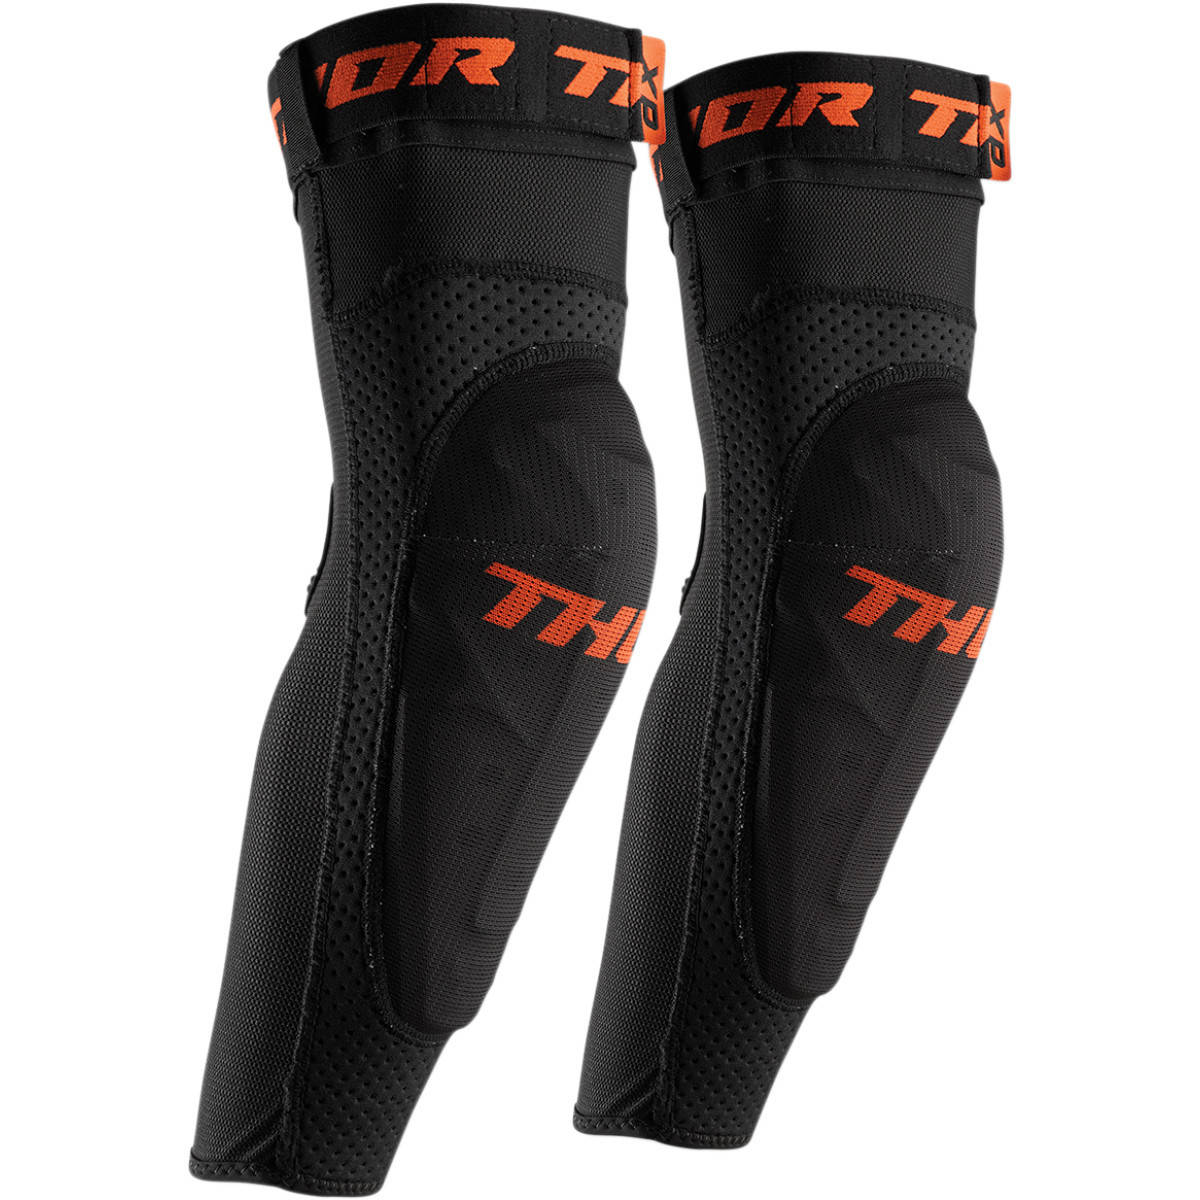 Shift Enforcer MX Bicycle Motorcycle Adult Elbow Guards 08086-001 